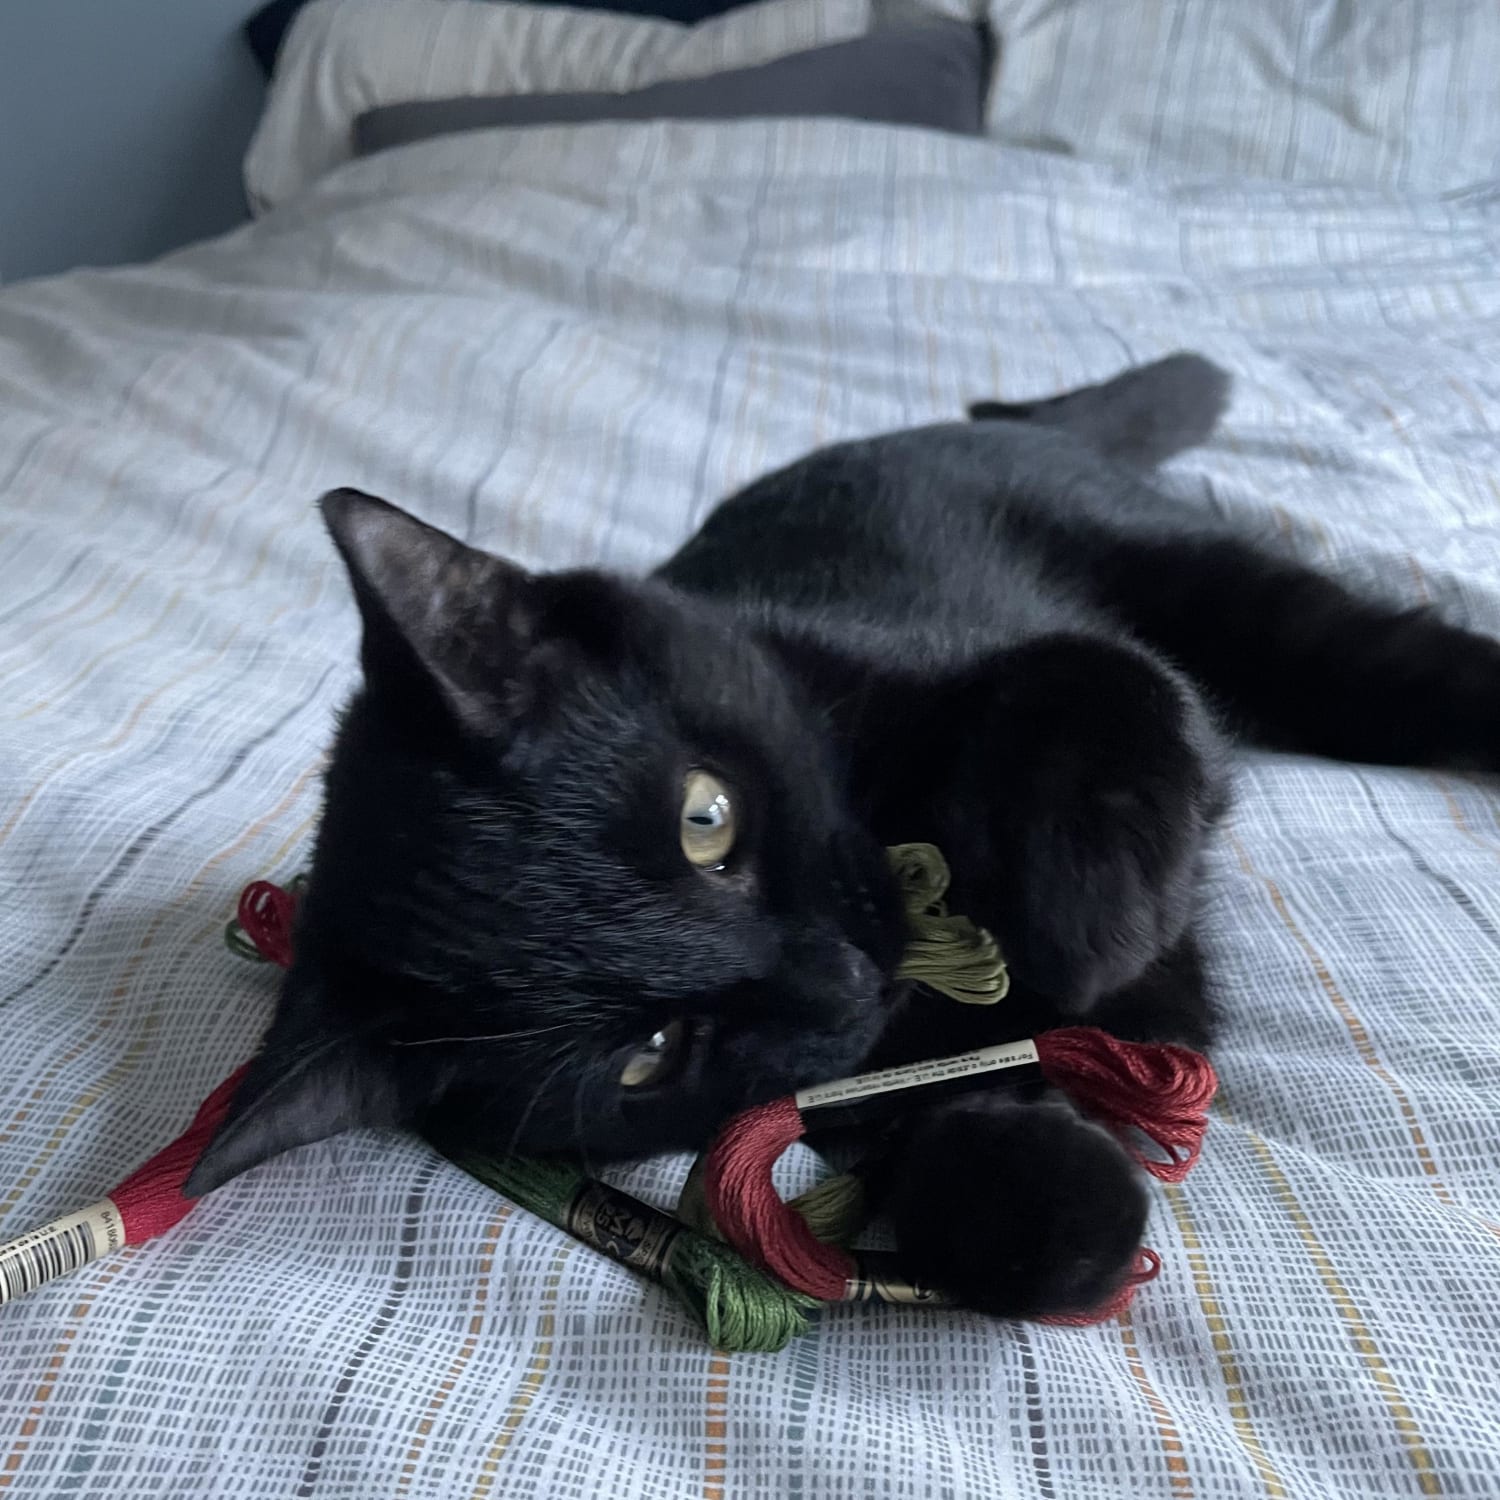 [CHAT] Just adopted a kitten. Any tips for stitching with playful pets?